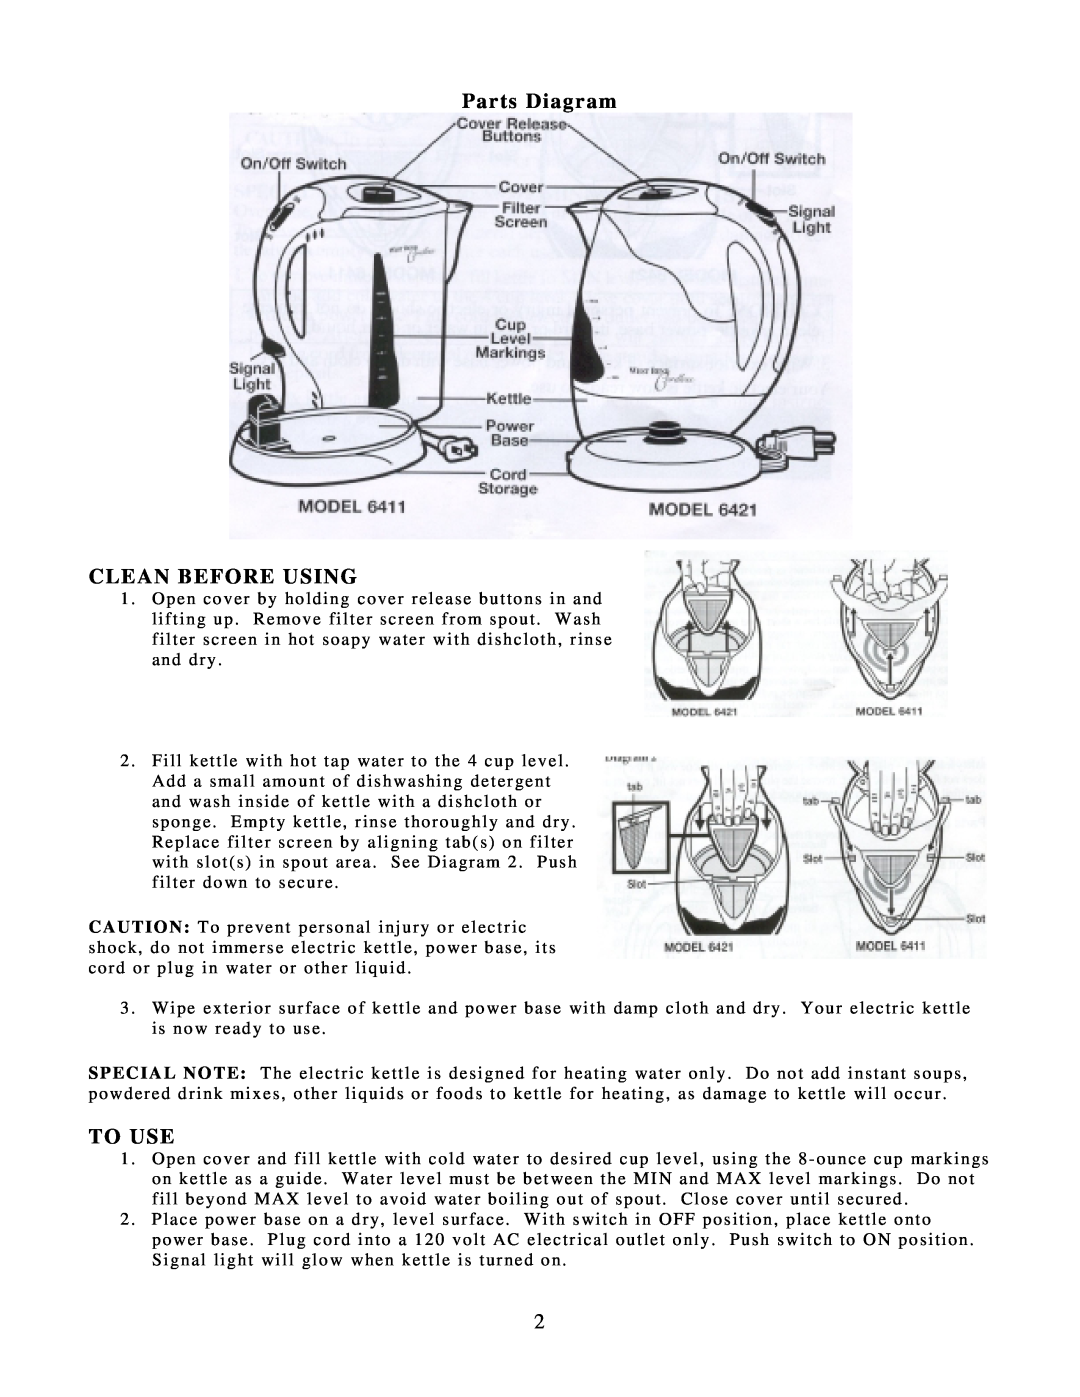 West Bend 6421Z instruction manual Parts Diagram CLEAN BEFORE USING, To Use 